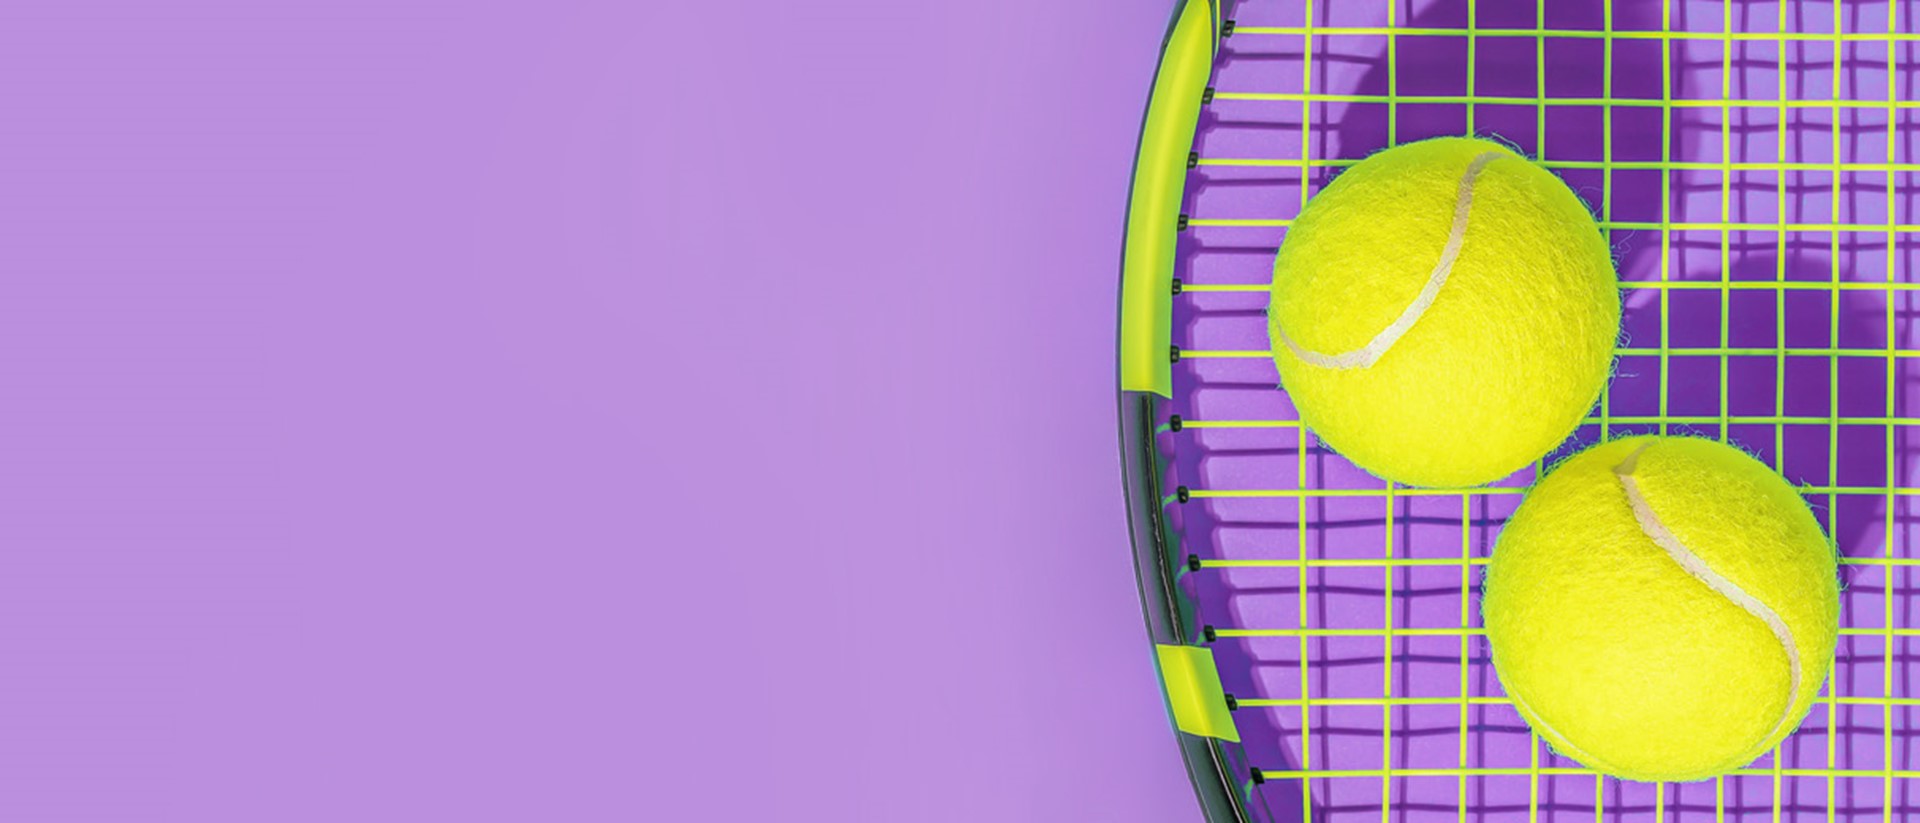 Image of two tennis balls on a tennis racket against a purple background